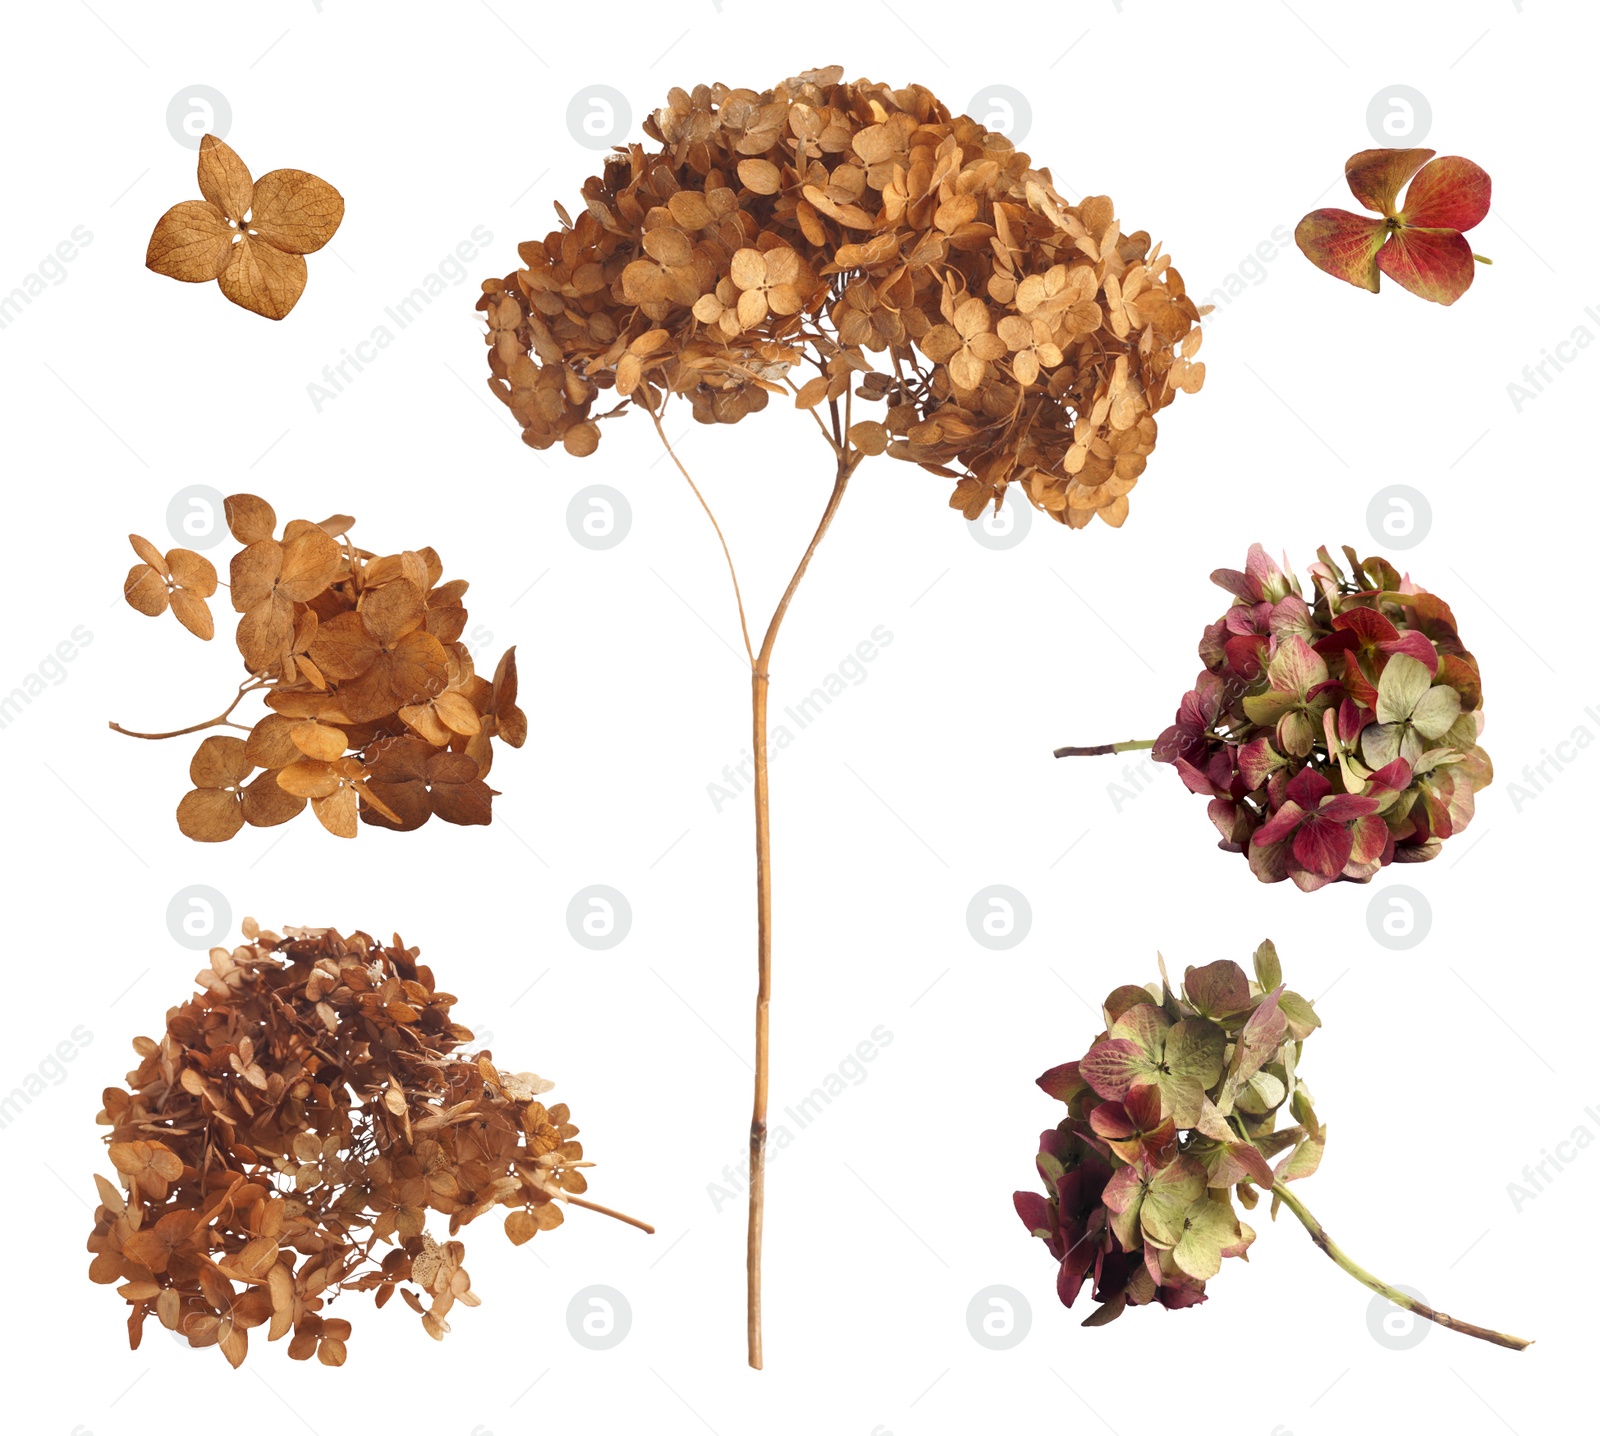 Image of Collage with dry hortensia (hydrangea) on white background